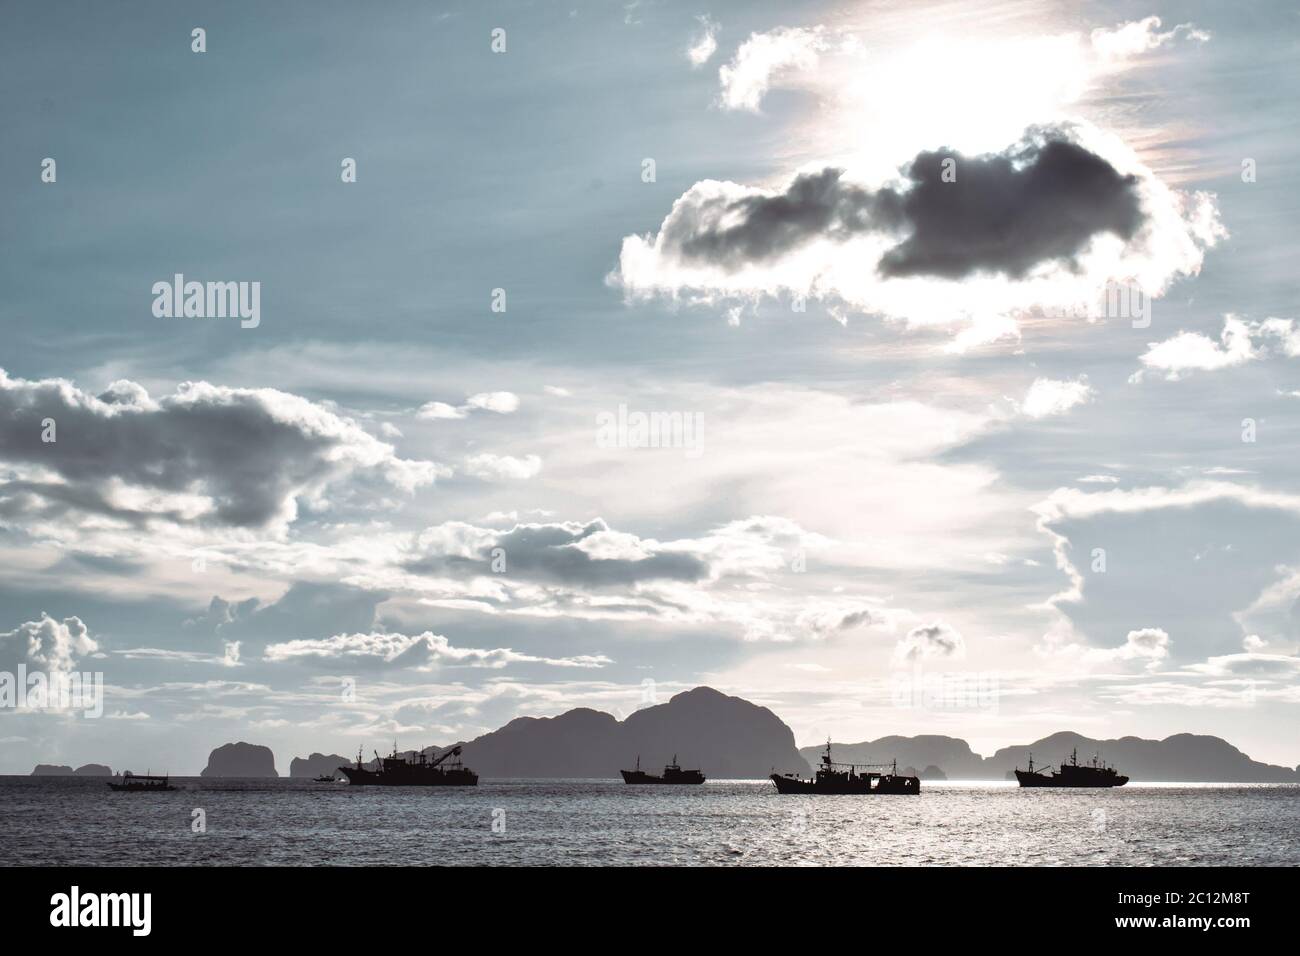 Fisherman ships cruising the sea in El Nido the Philippines under clear blue sky on a sunny day Stock Photo